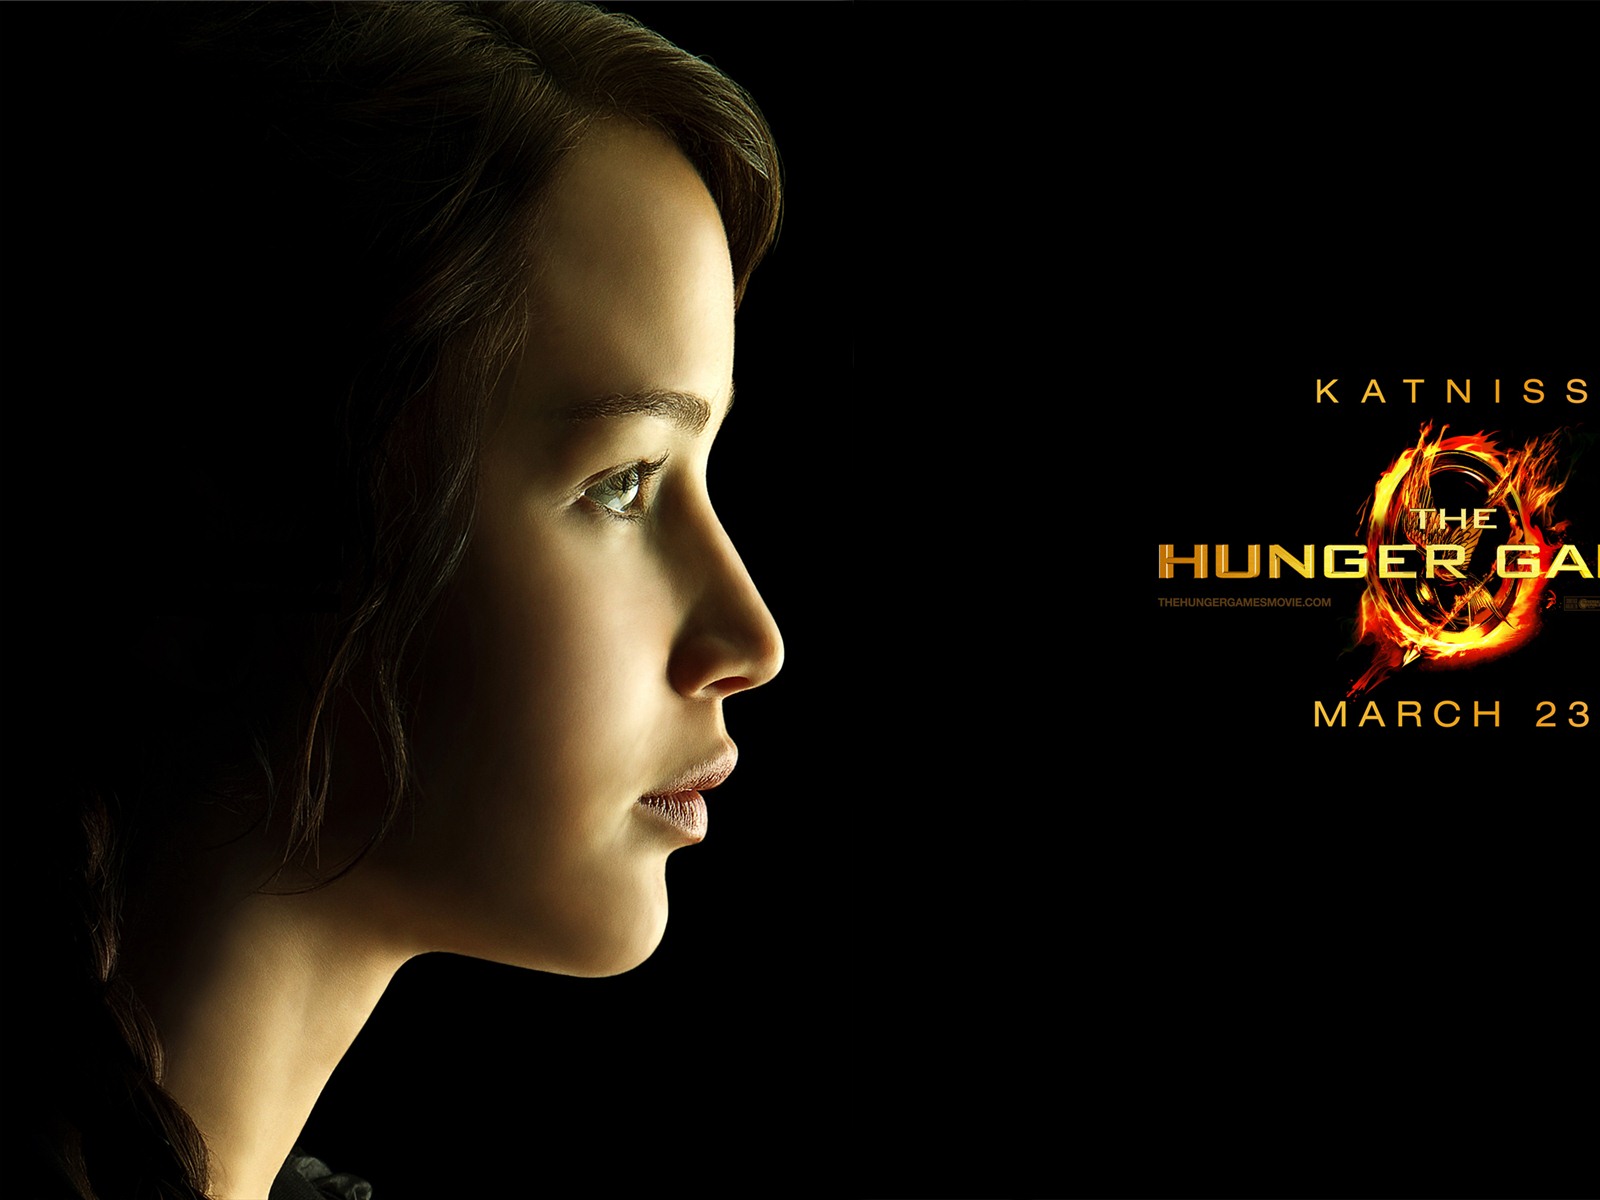 The Hunger Games HD wallpapers #14 - 1600x1200